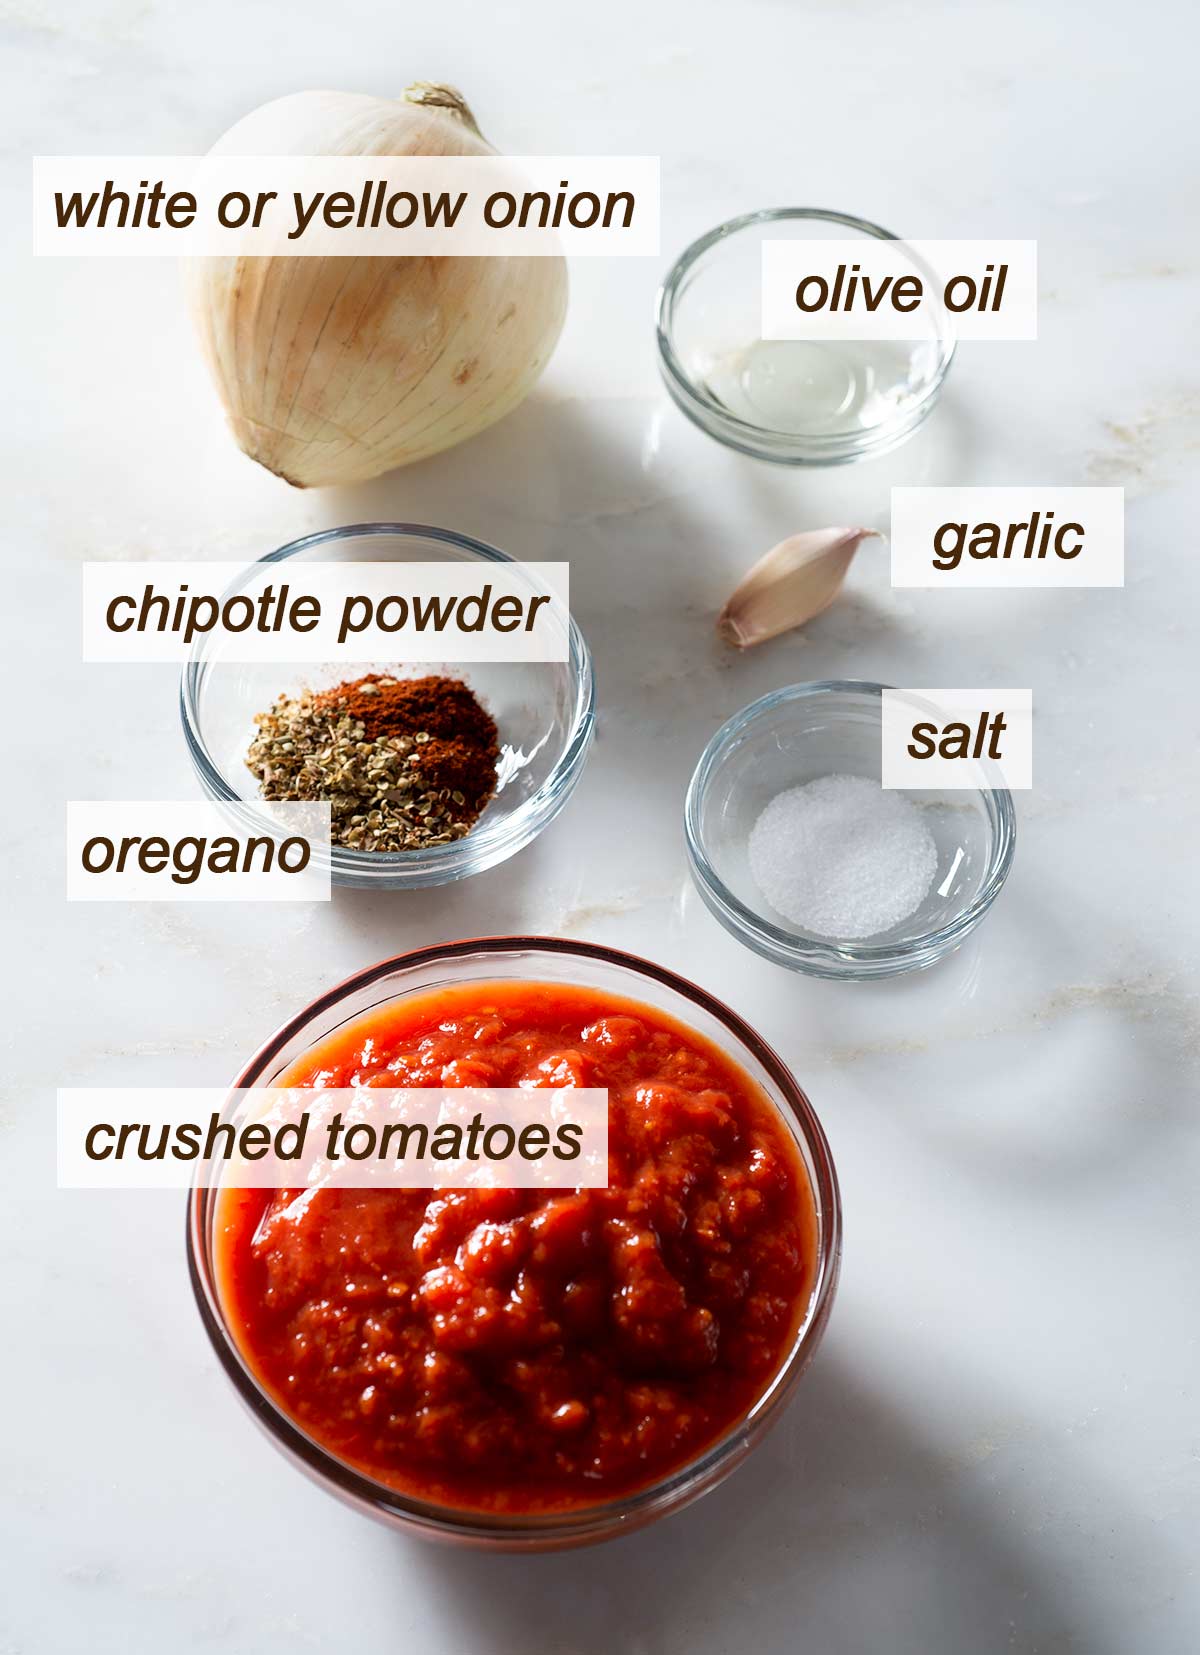 Ingredients for tomato chipotle pizza sauce on a table.